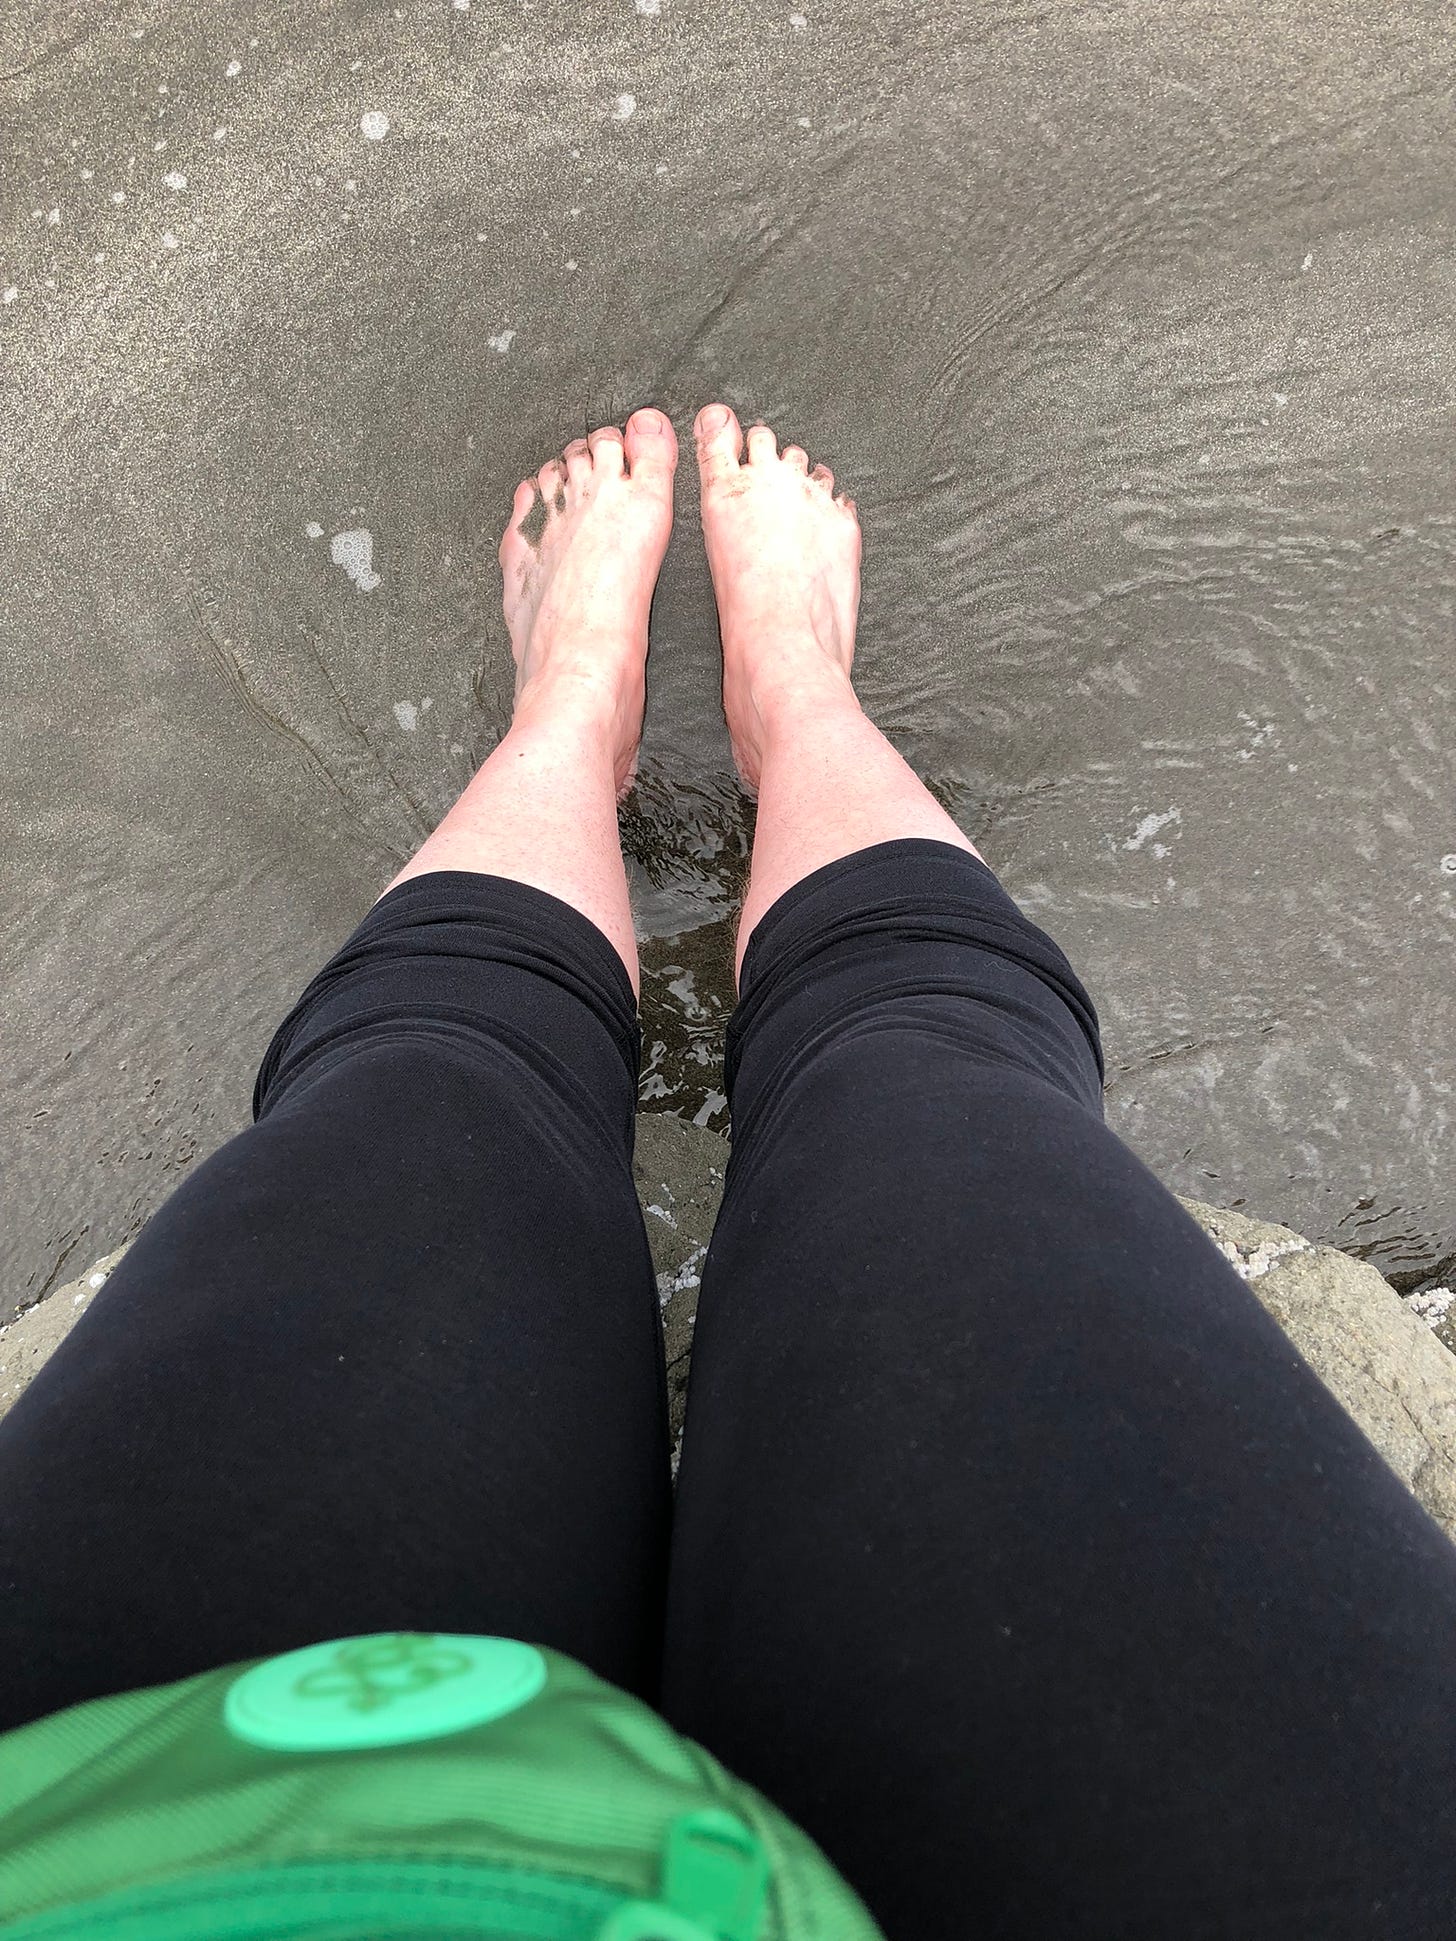 from a pov looking down, the edge of a green fanny pack above two legs with black leggings scrunched upward with bare feet resting on the sand where a wave has just receeded